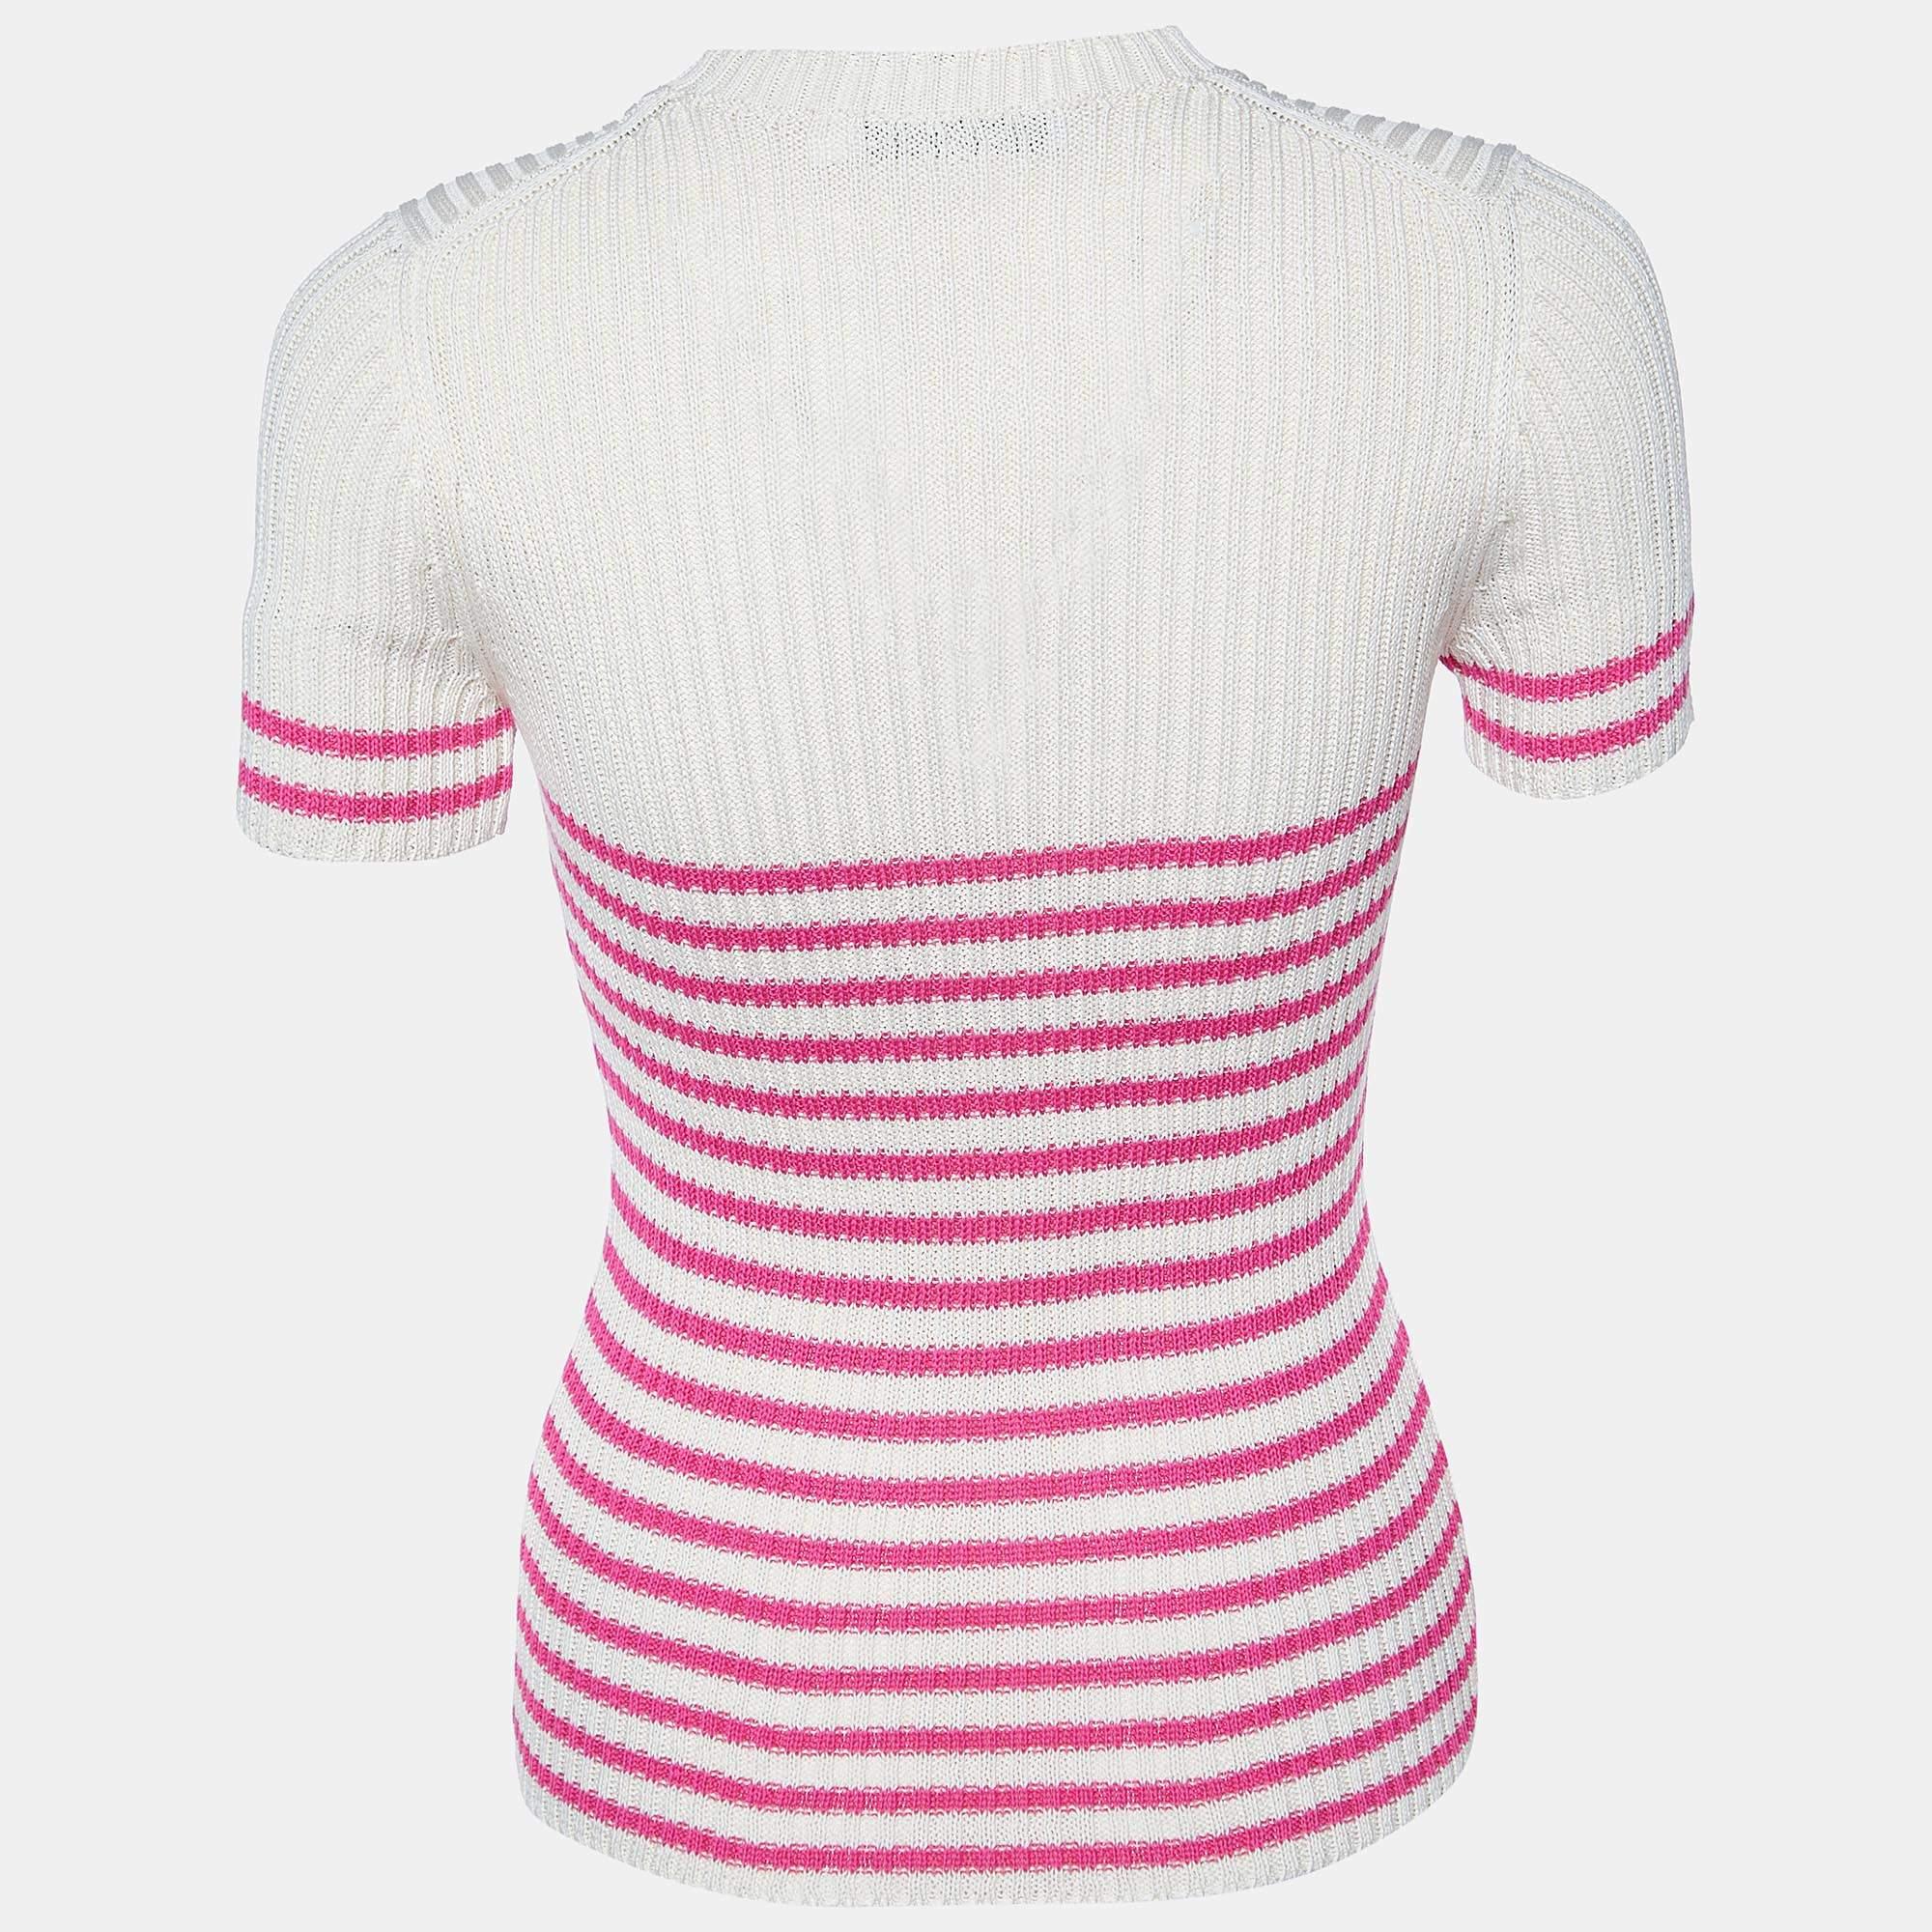 Wrap yourself in luxury with the Dior jumper. Crafted with precision and style, this jumper exudes elegance with its iconic Dior logo stripes. Soft cotton knit ensures comfort while making a bold fashion statement. Elevate your wardrobe with this